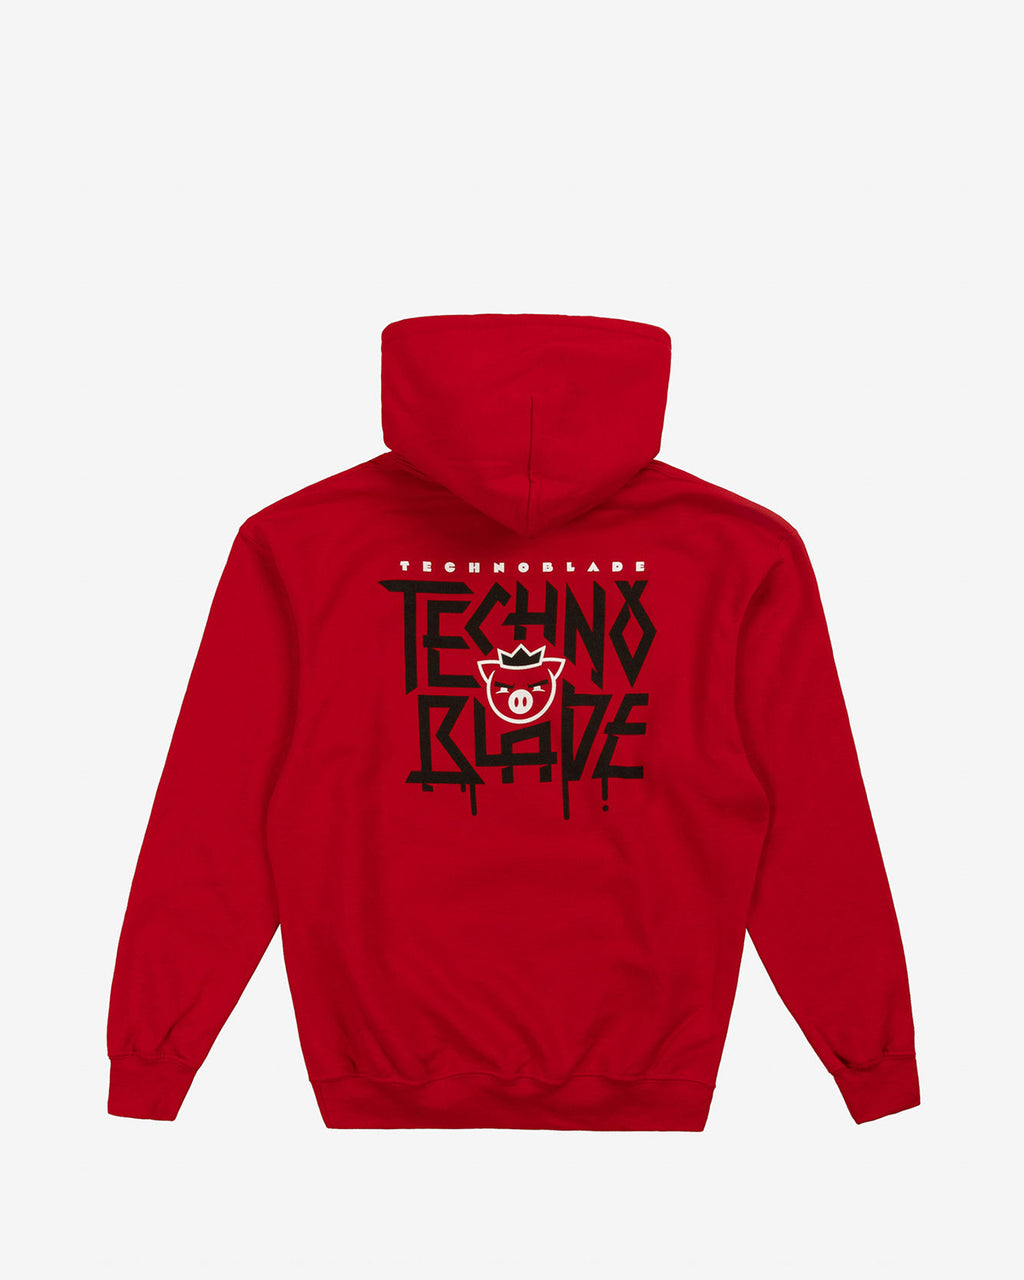 Technoblade Never Dies Youth Hoodie Technoblade Youth Hoodie 